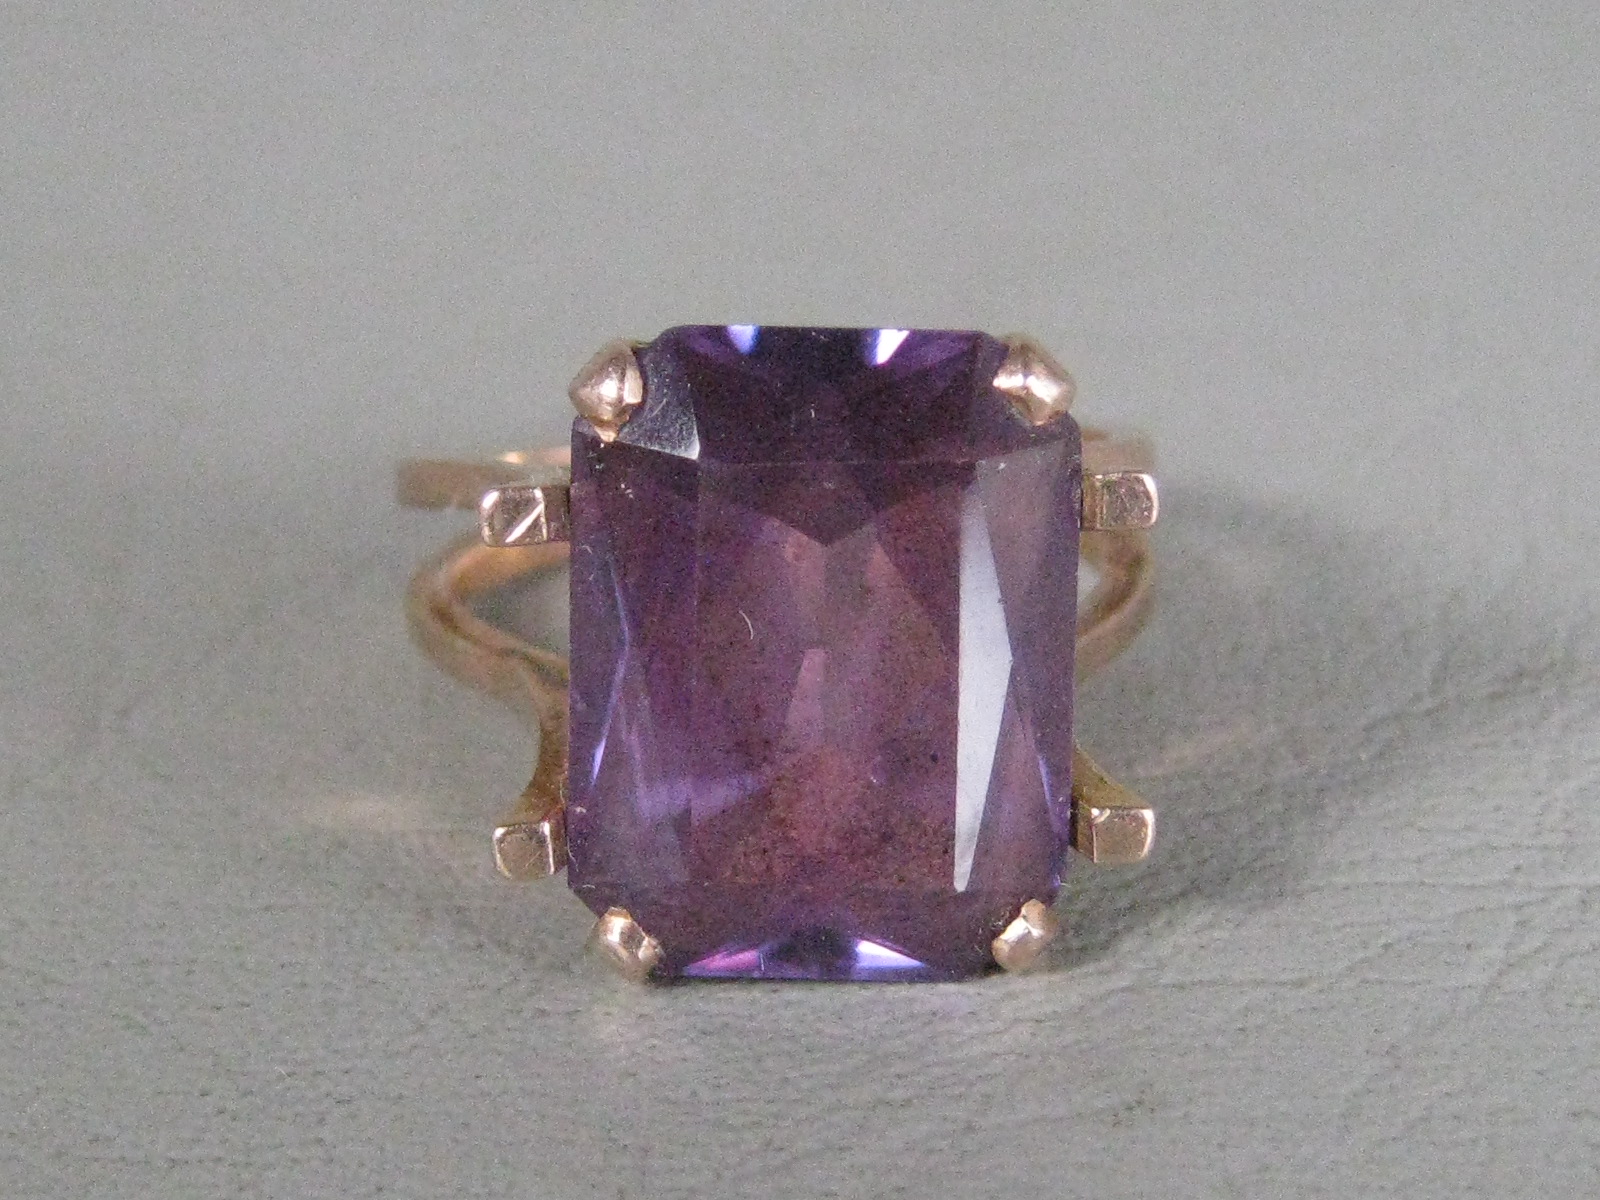 Vintage Antique Amethyst Ring Size 8.25 Estate Jewelry Rose Gold? No Reserve! 5